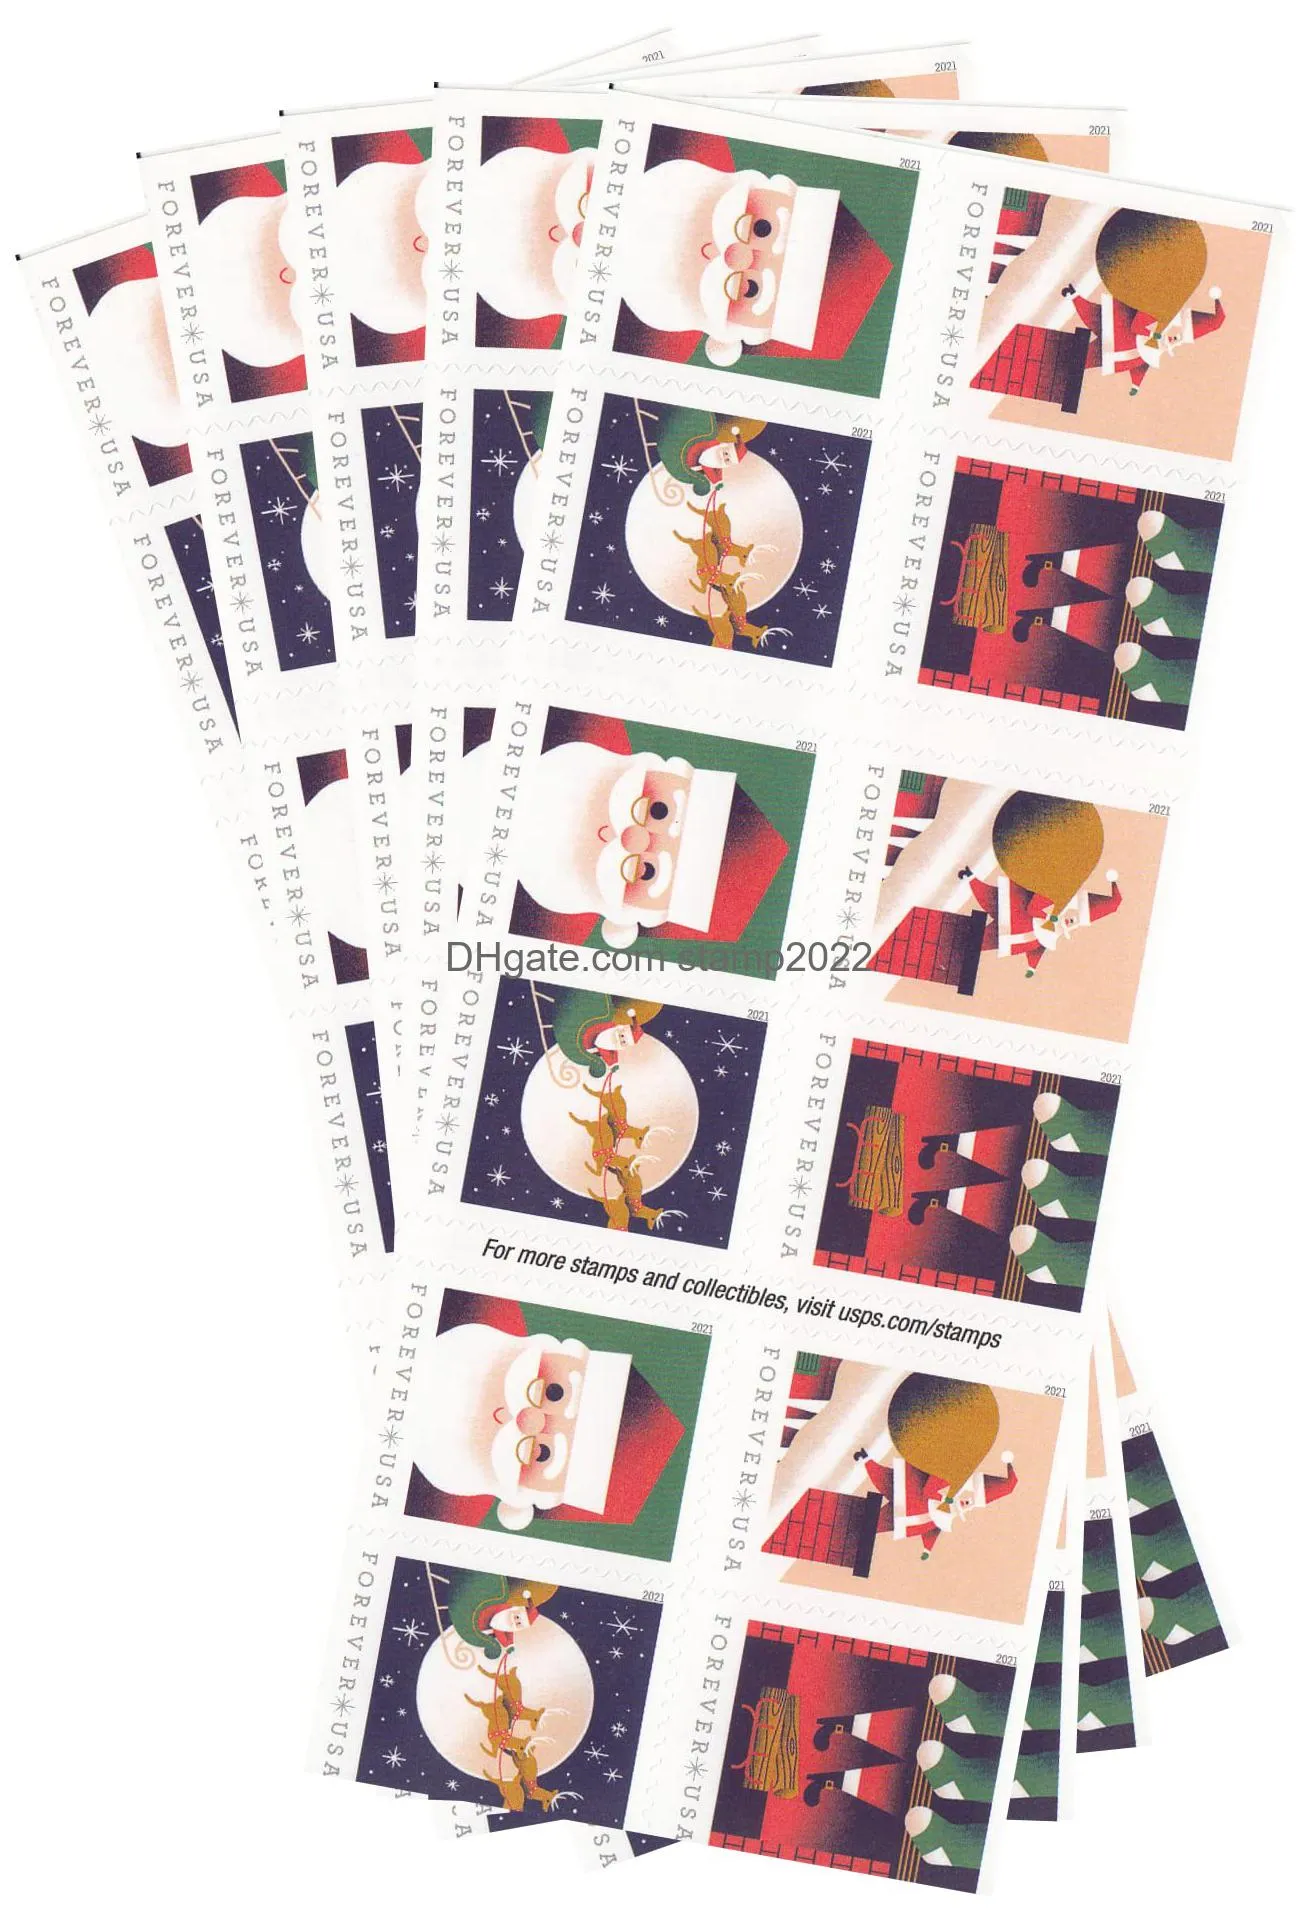 made of hearts sheet of 20 forever first class postage stamps wedding celebration love valentines 10 sheets of 20